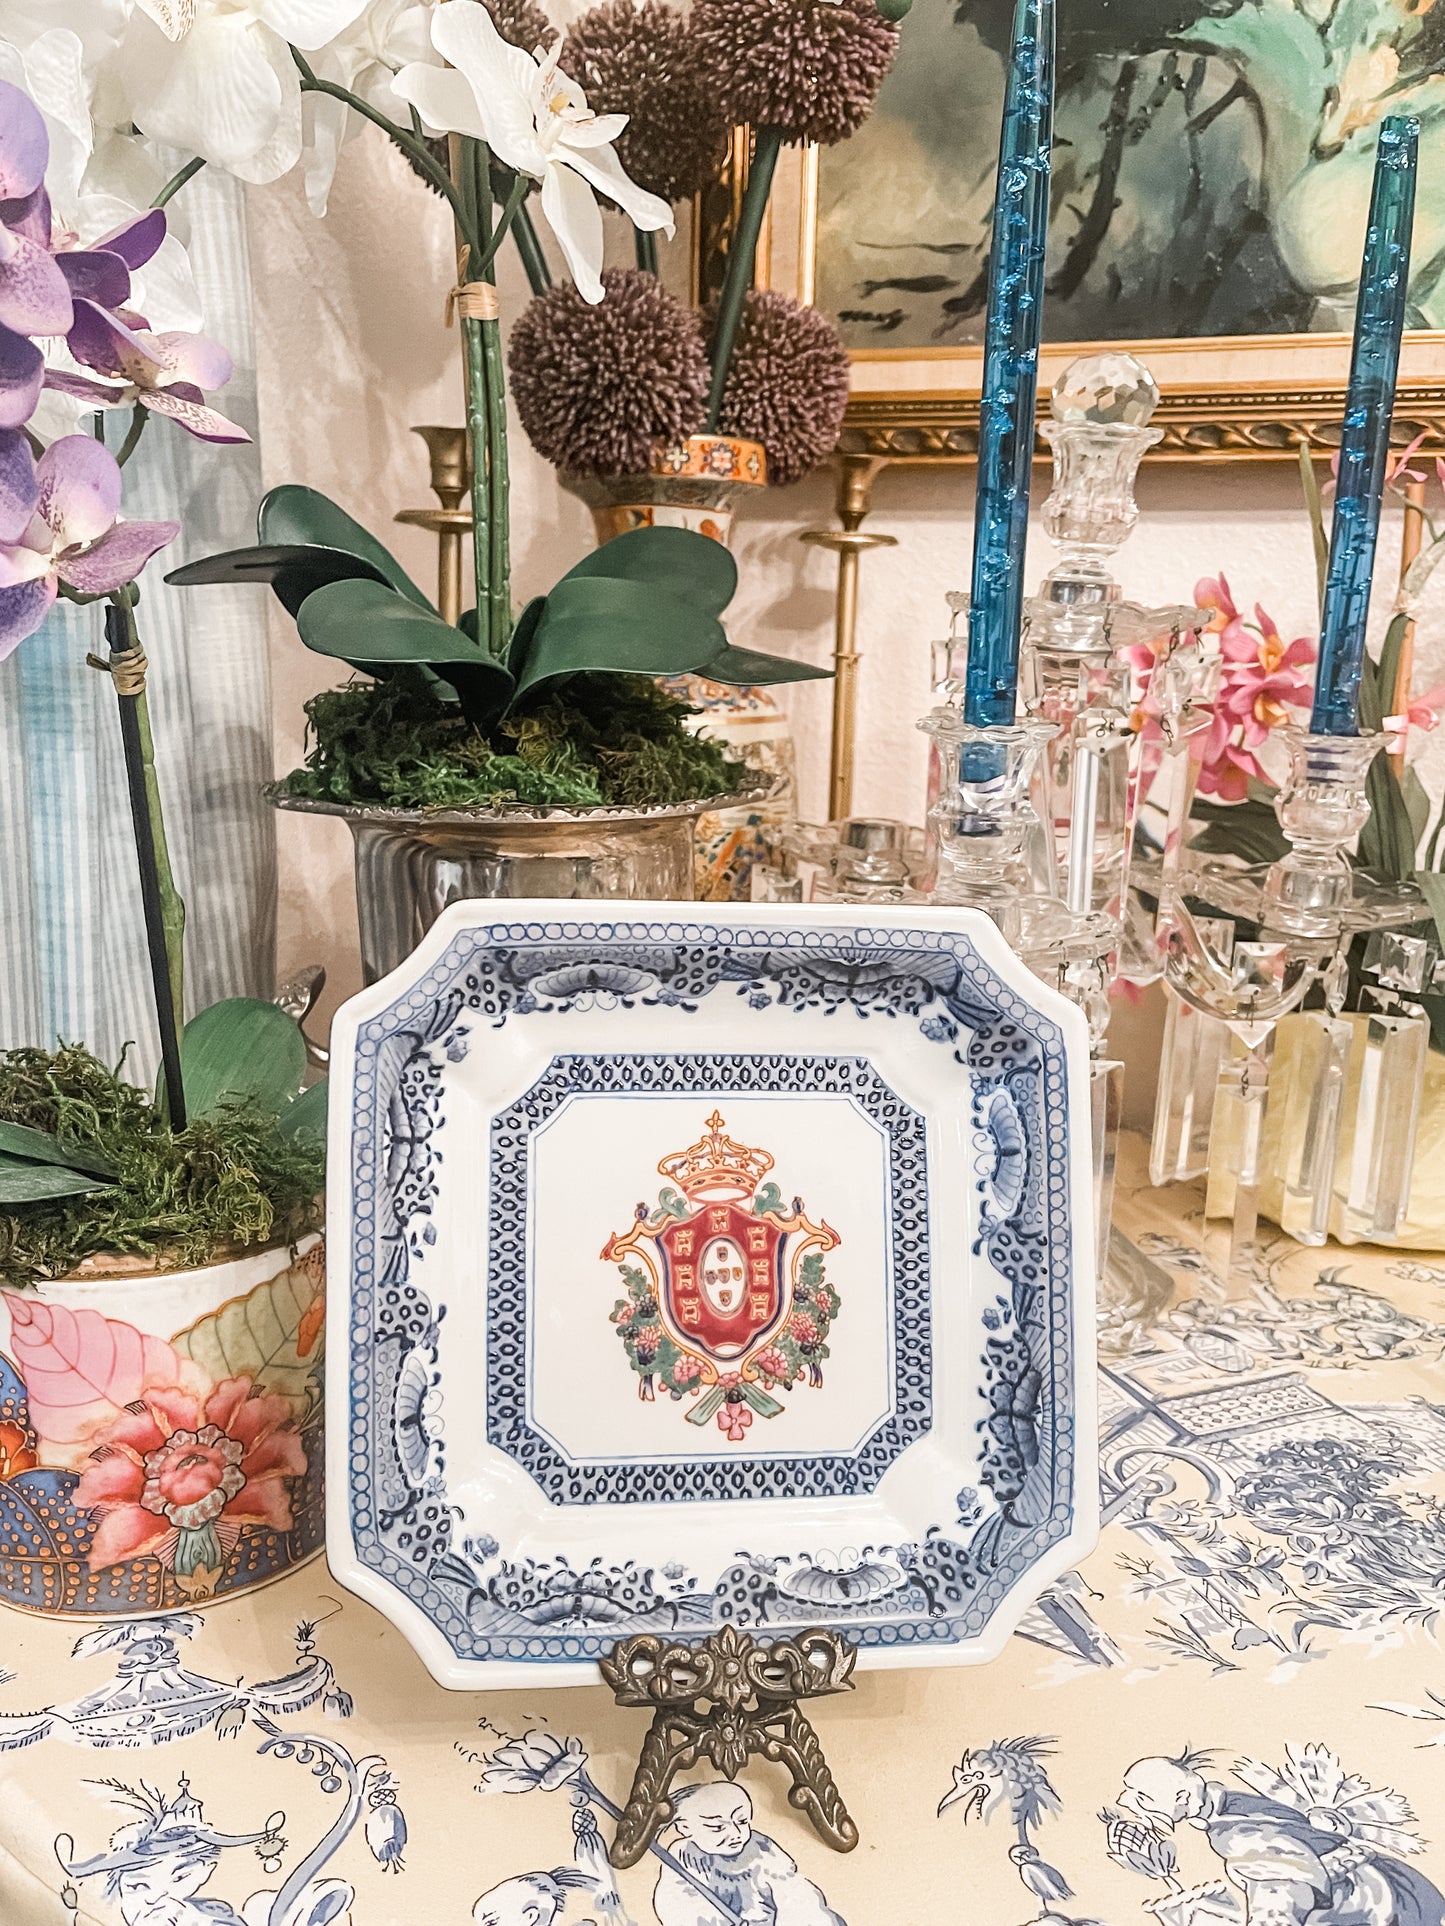 Vintage Blue and White Plate with Royal Crown Motif, Easel Included